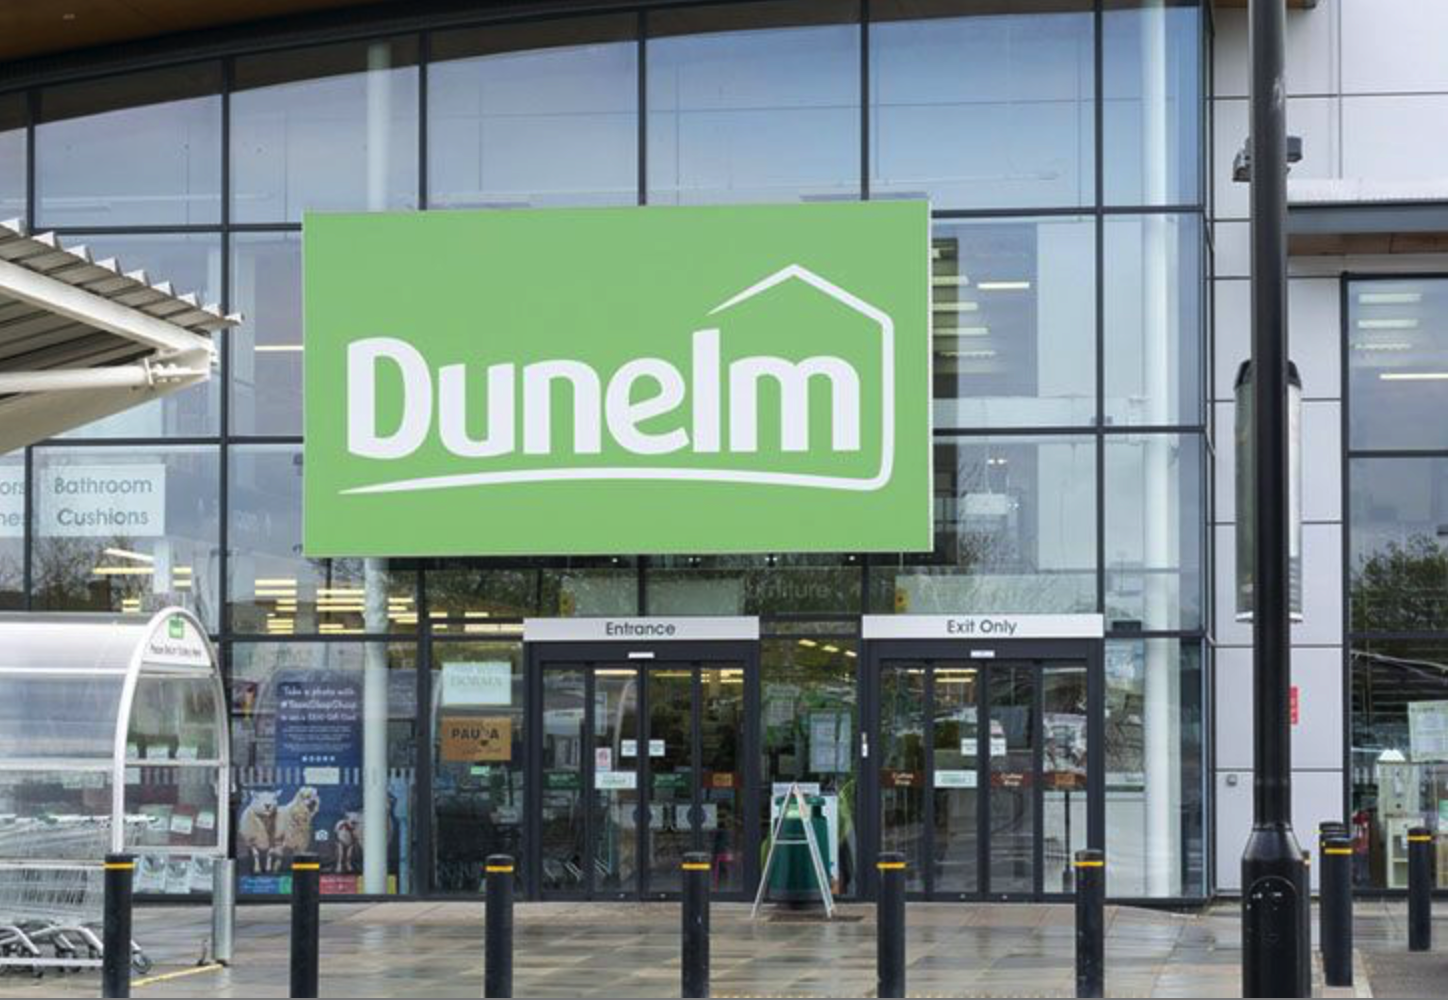 Dunelm Christmas sales grow by 18% YoY